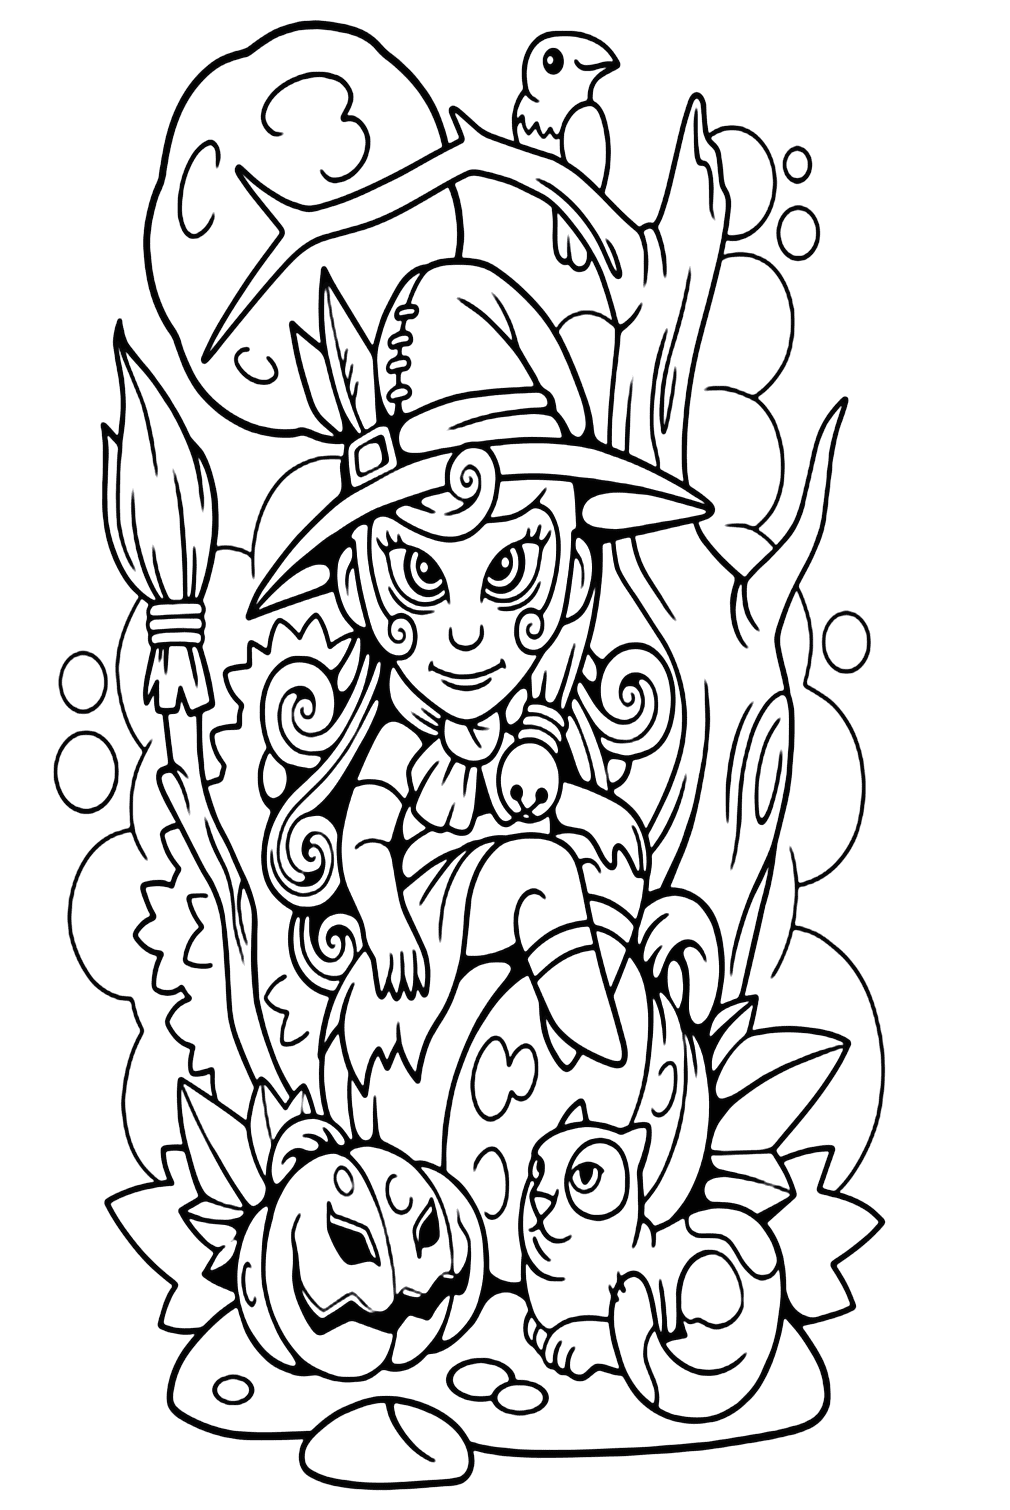 Crow And Witch Coloring Page - Free Printable Coloring Pages